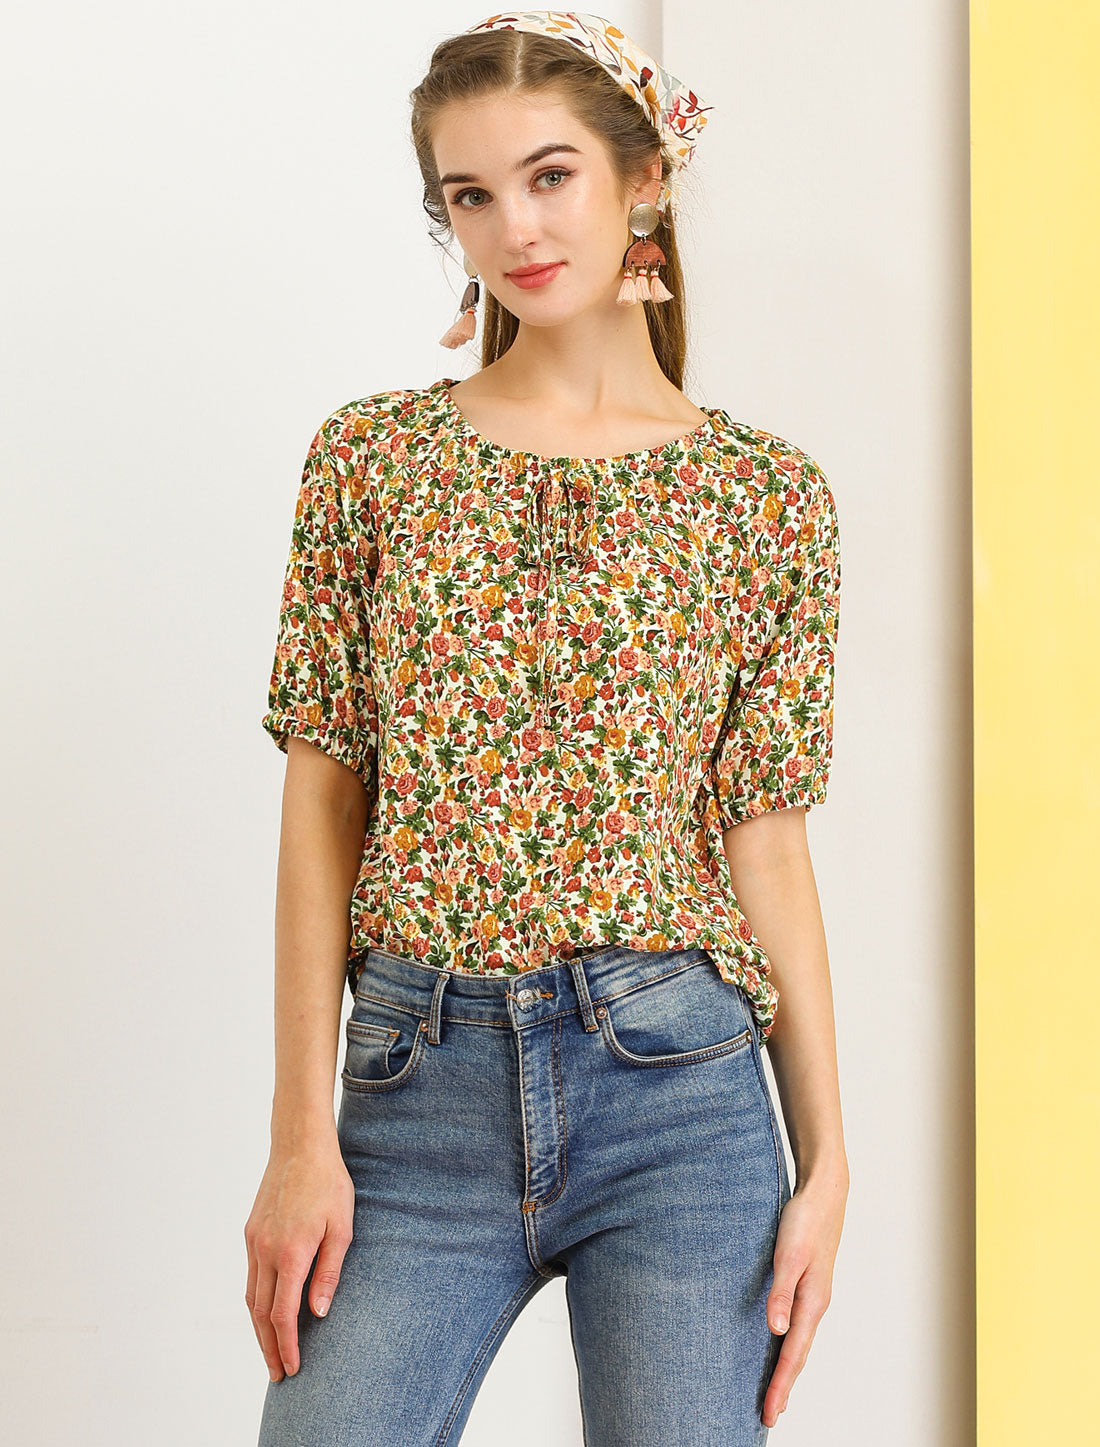 Allegra K Floral Print Round Neck Peasant Casual Puff Short Sleeve Blouse